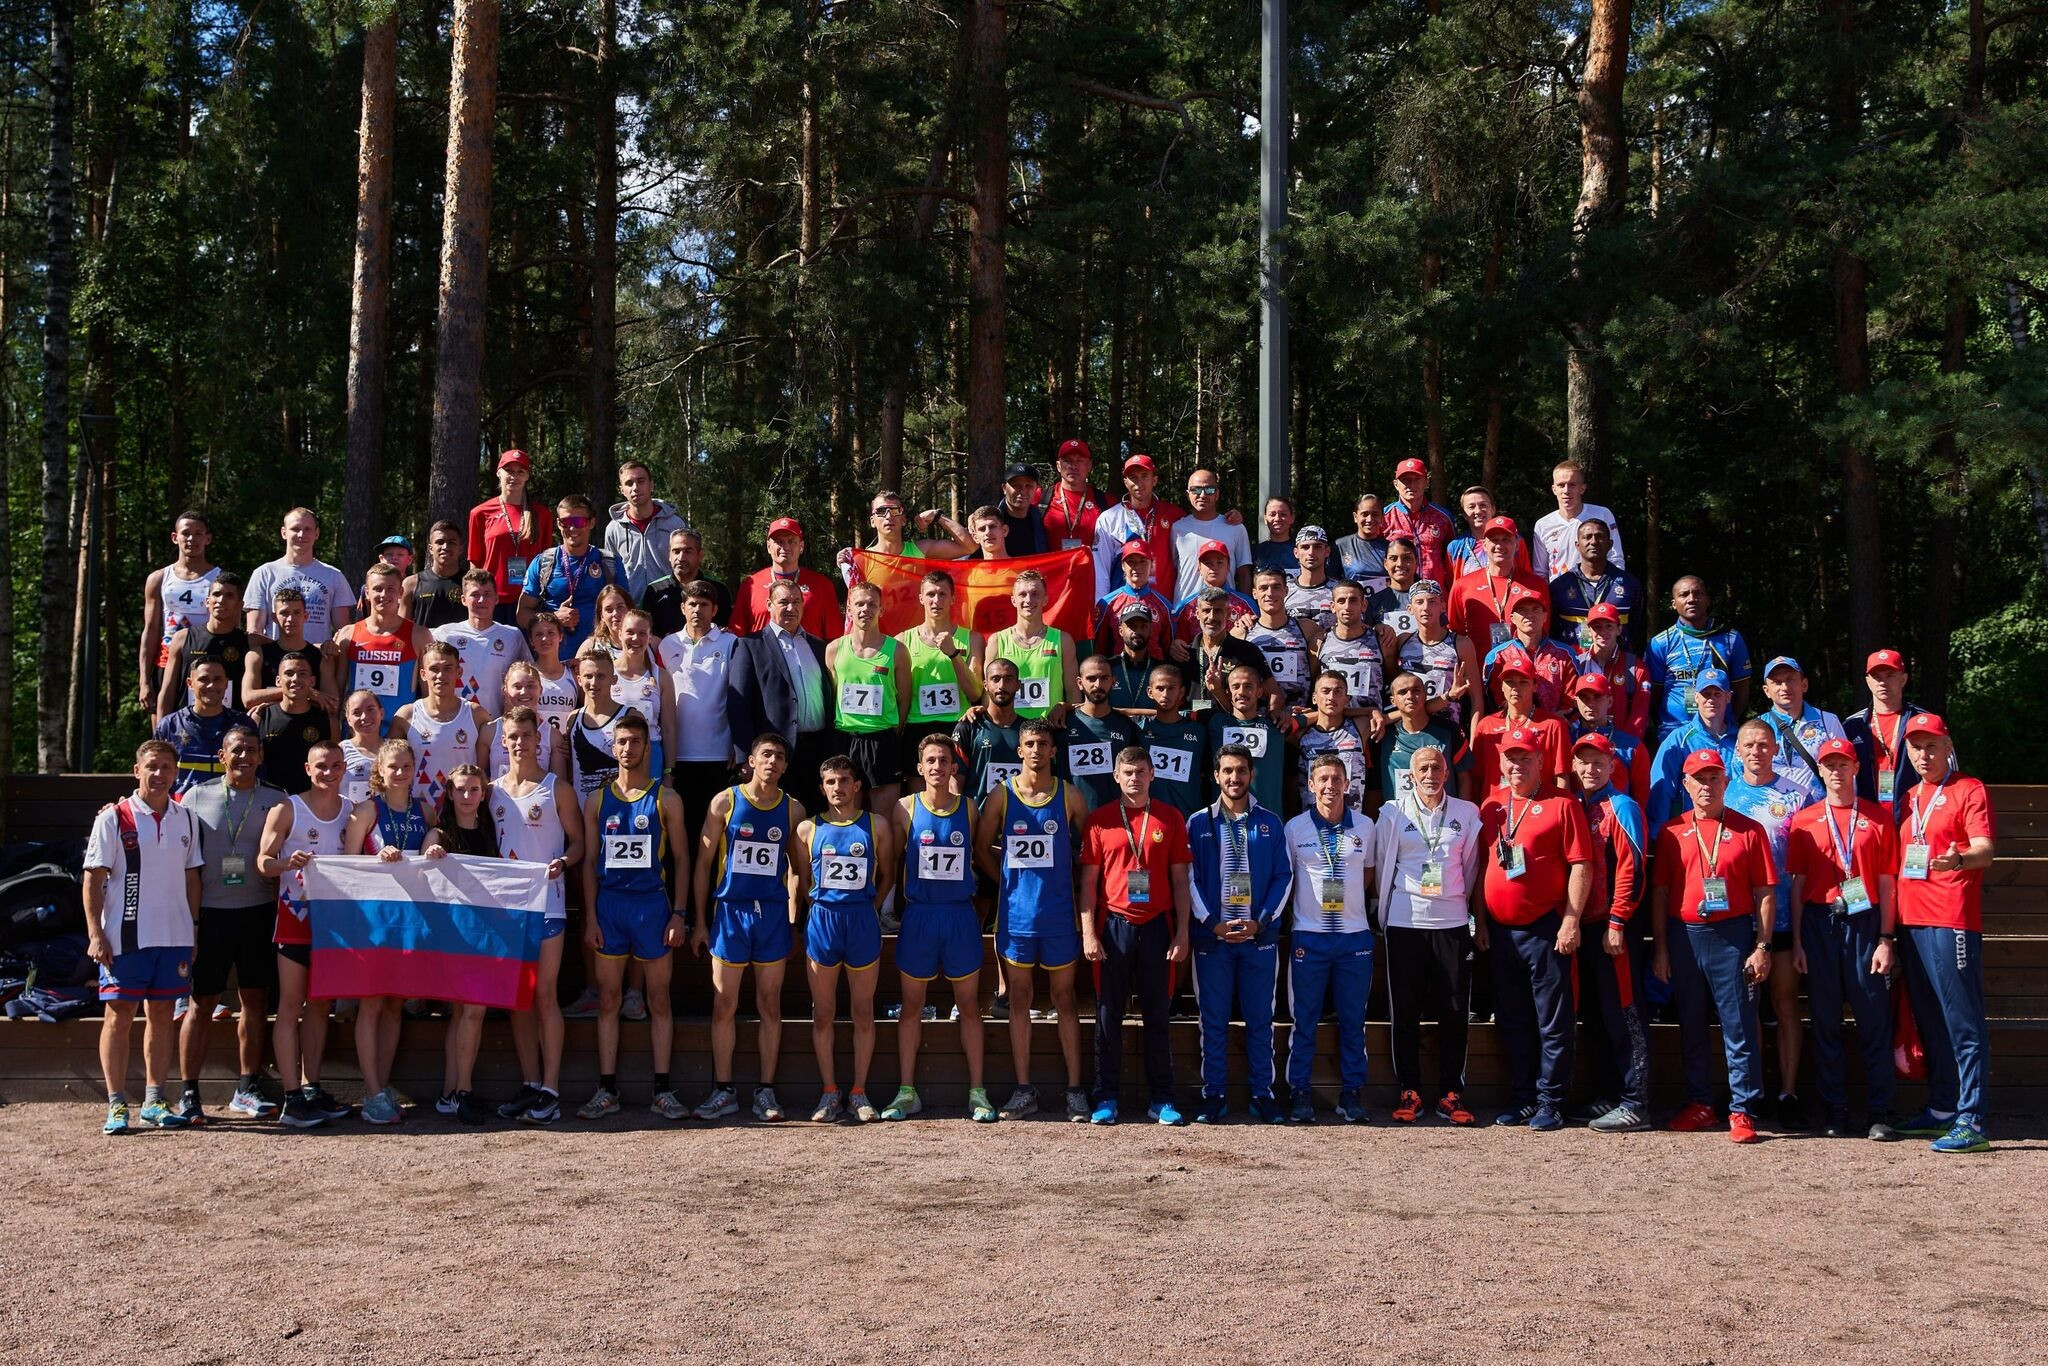 Russia athletes competed under the country's flag at the World Cadet Games held in St Petersburg last year ©CISM